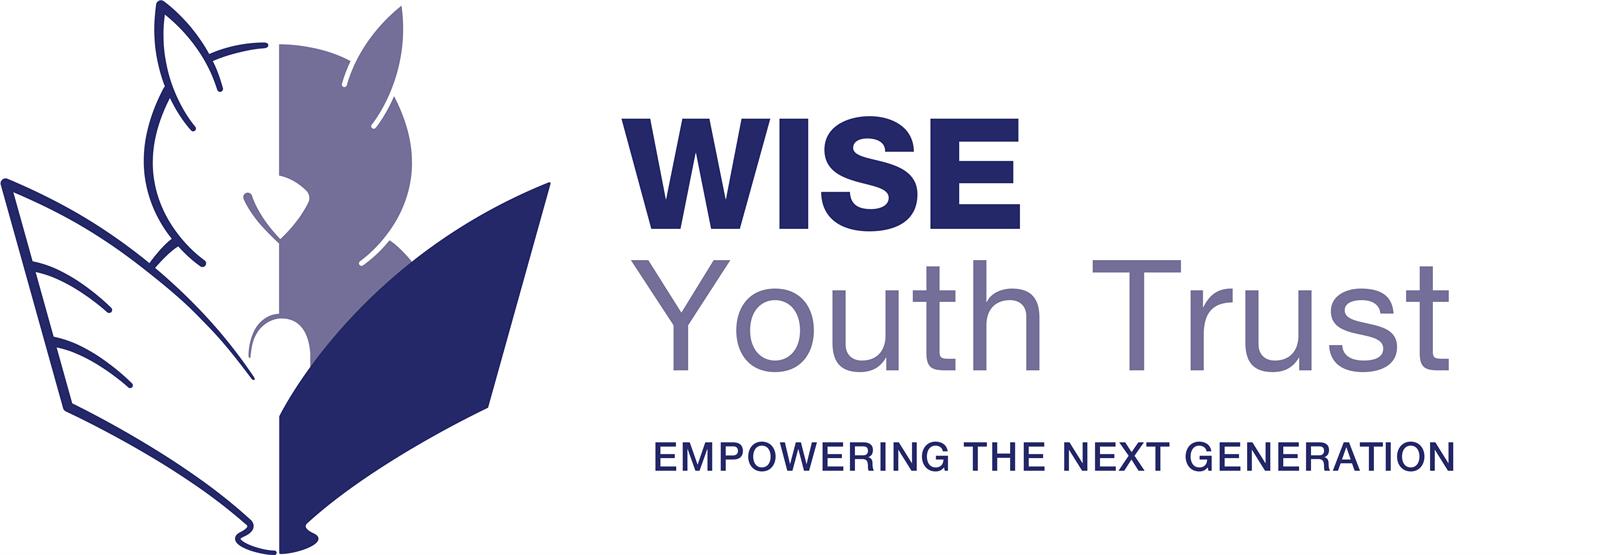 WISE Youth Trust community image